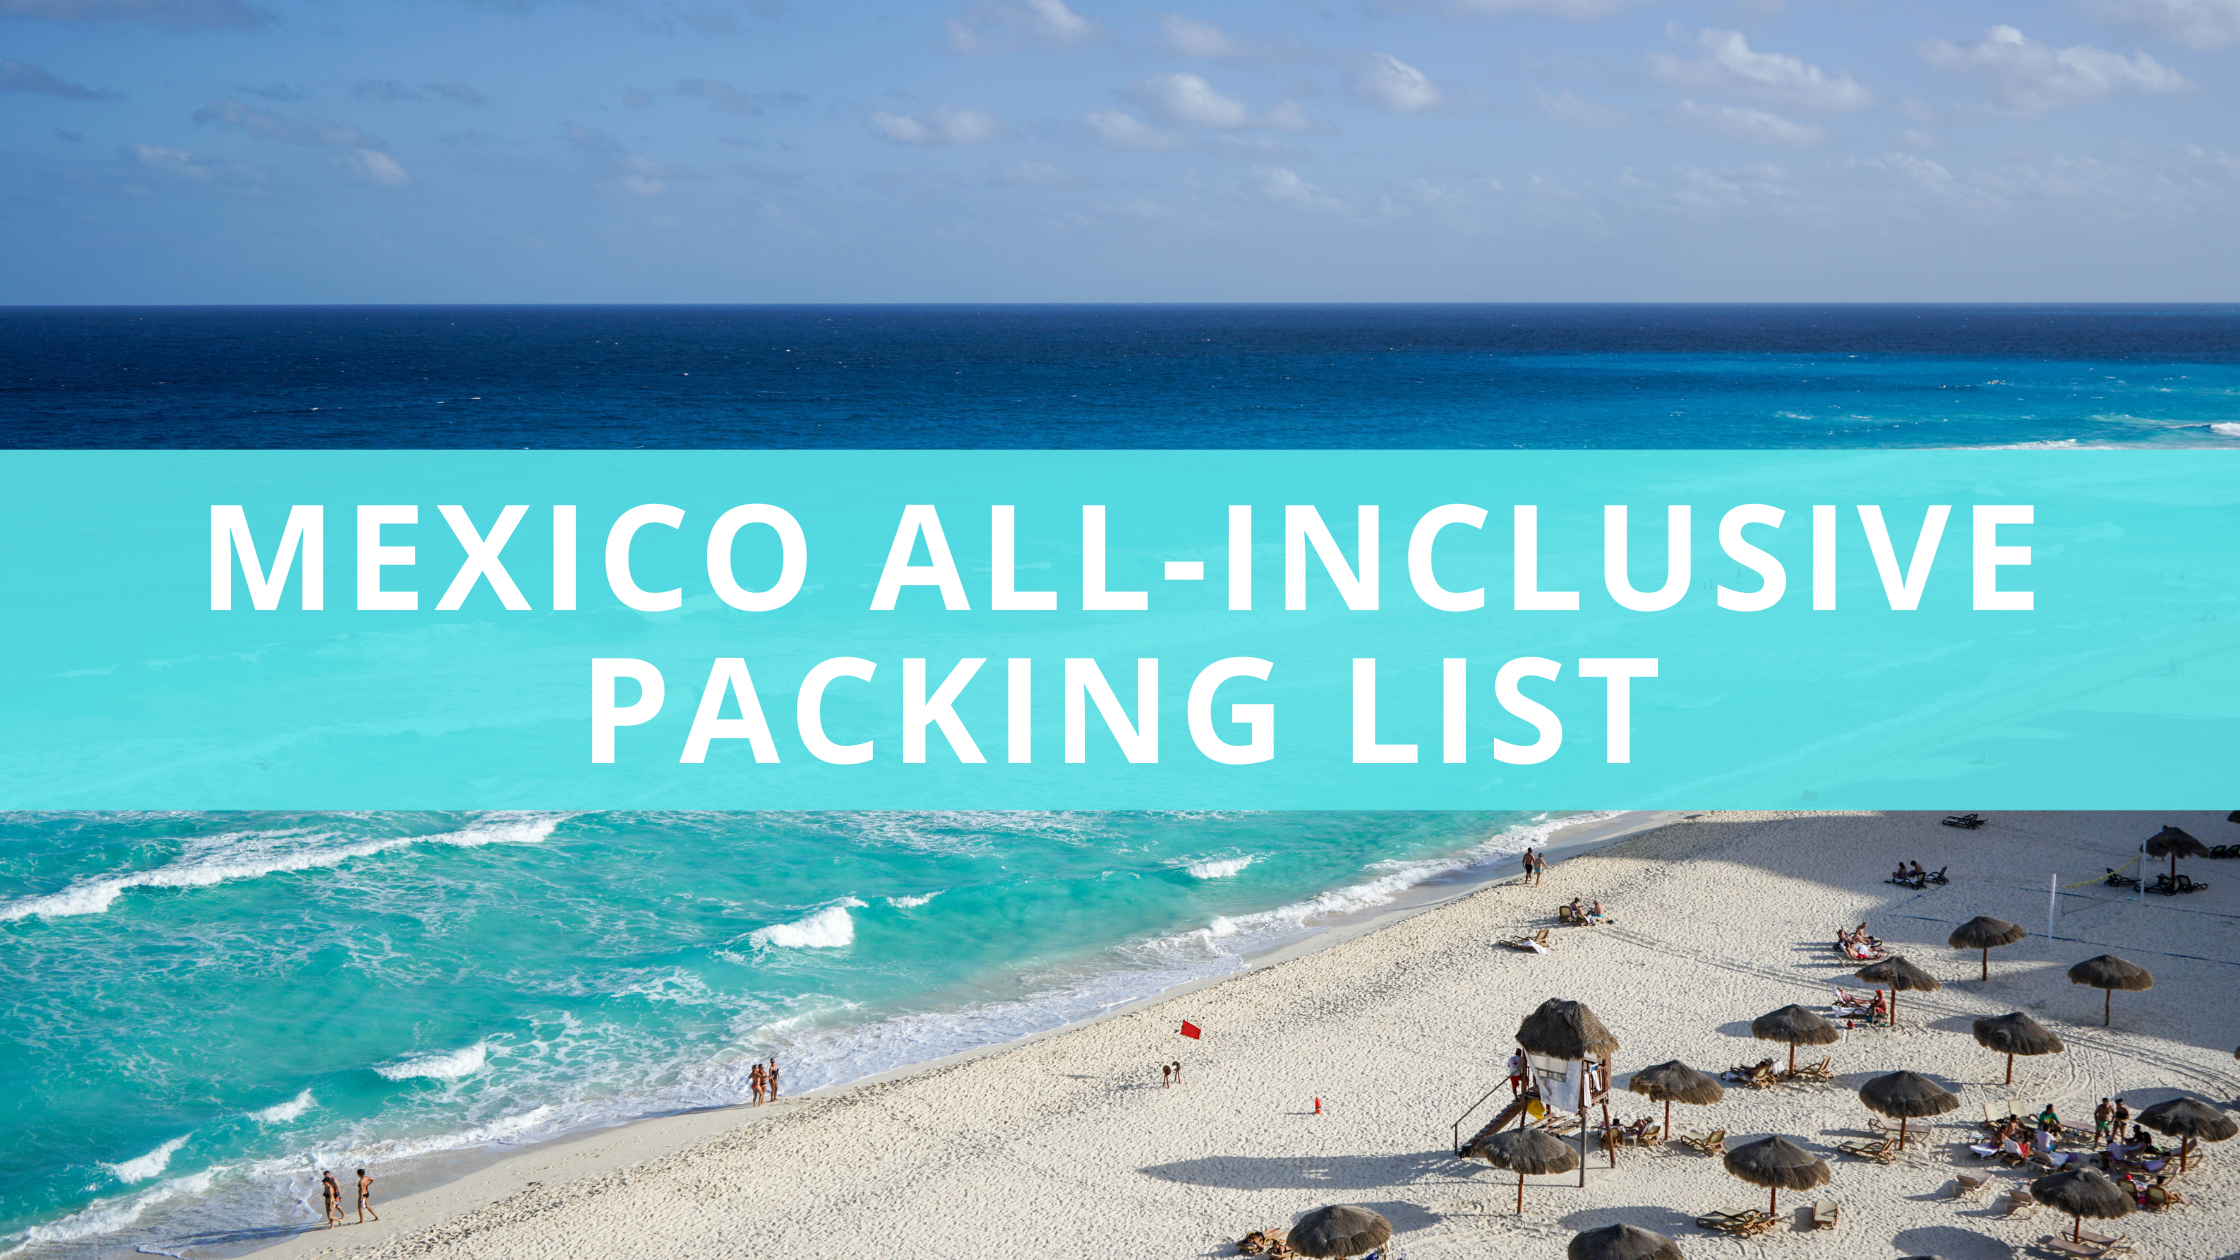 Mexico All-Inclusive Packing List